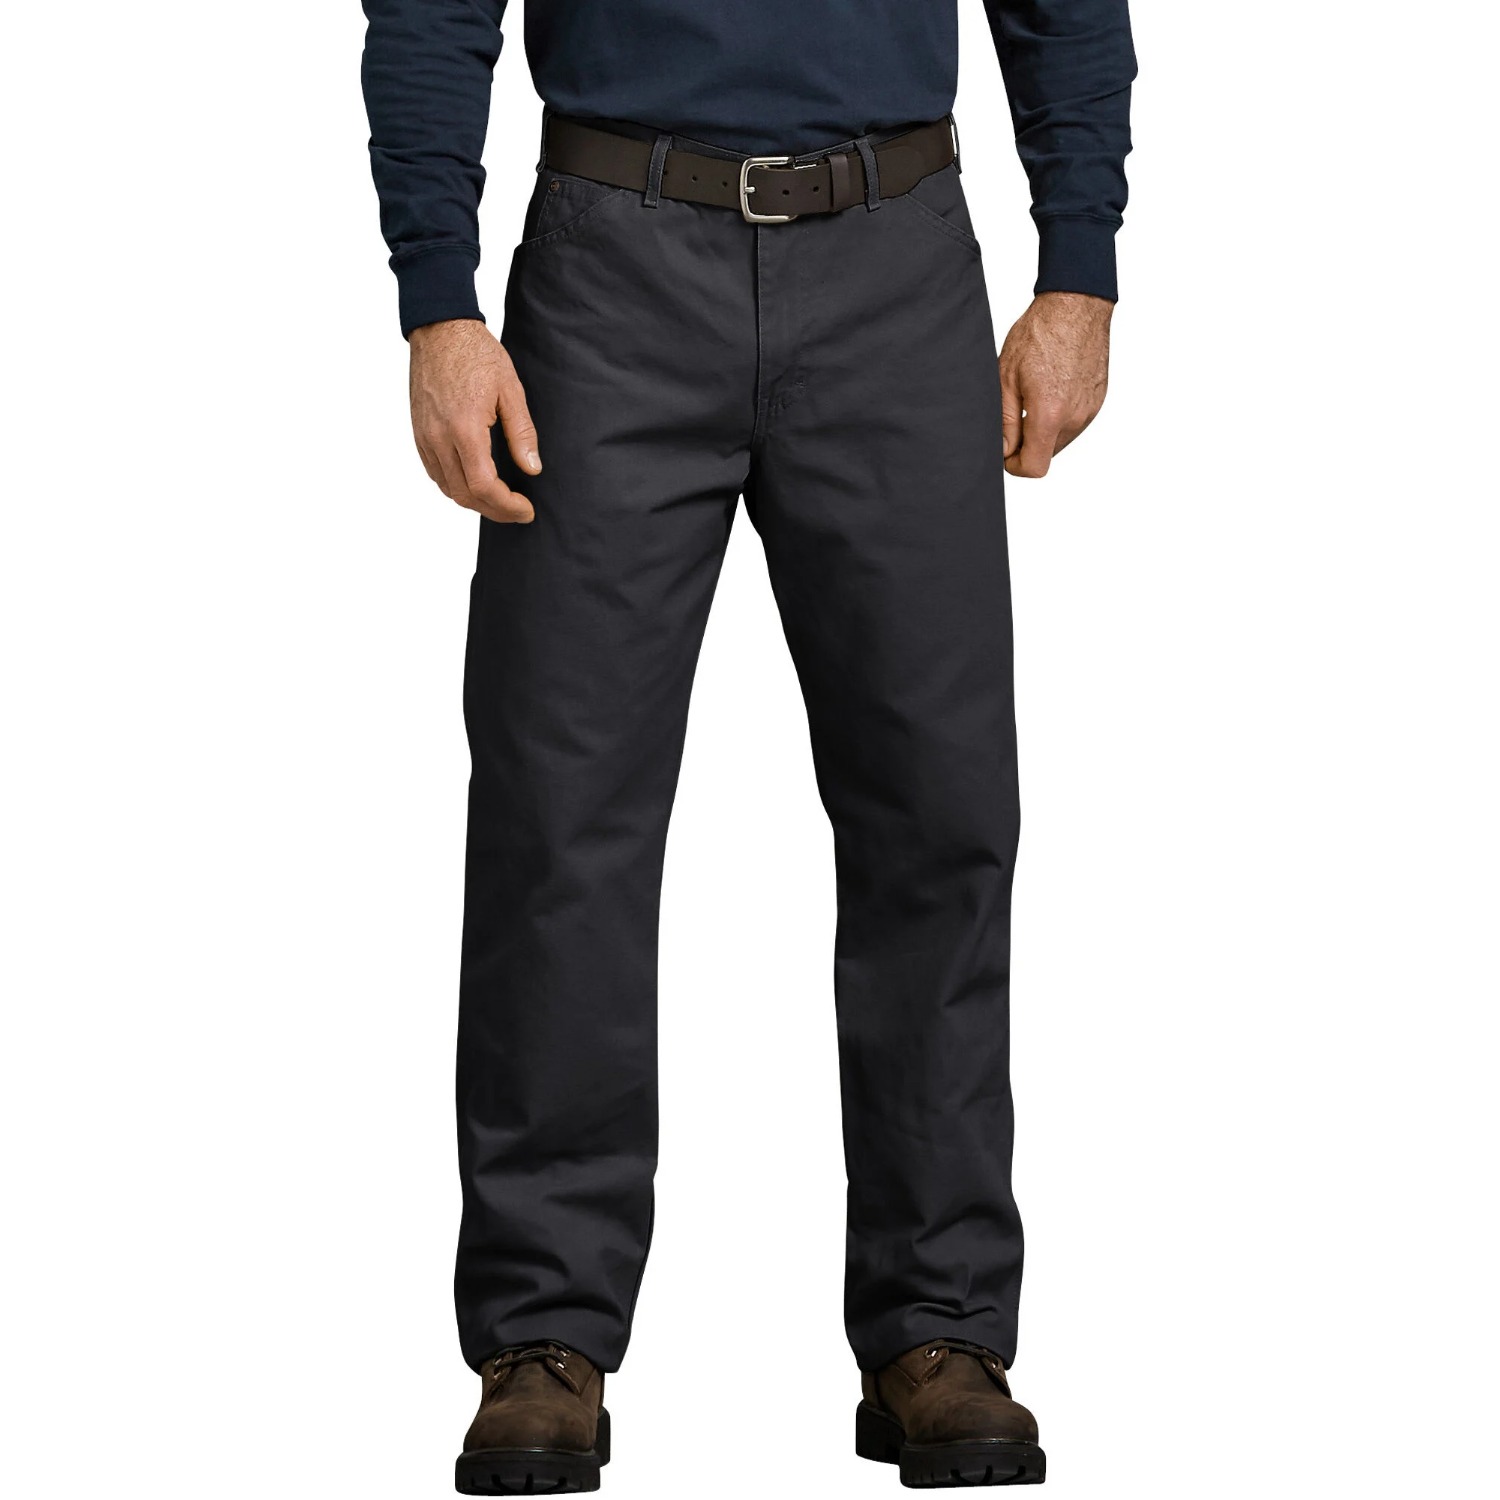 Dickies Mens Work Jeans Relaxed Fit Carpenter Style Jean Cotton Pants ...